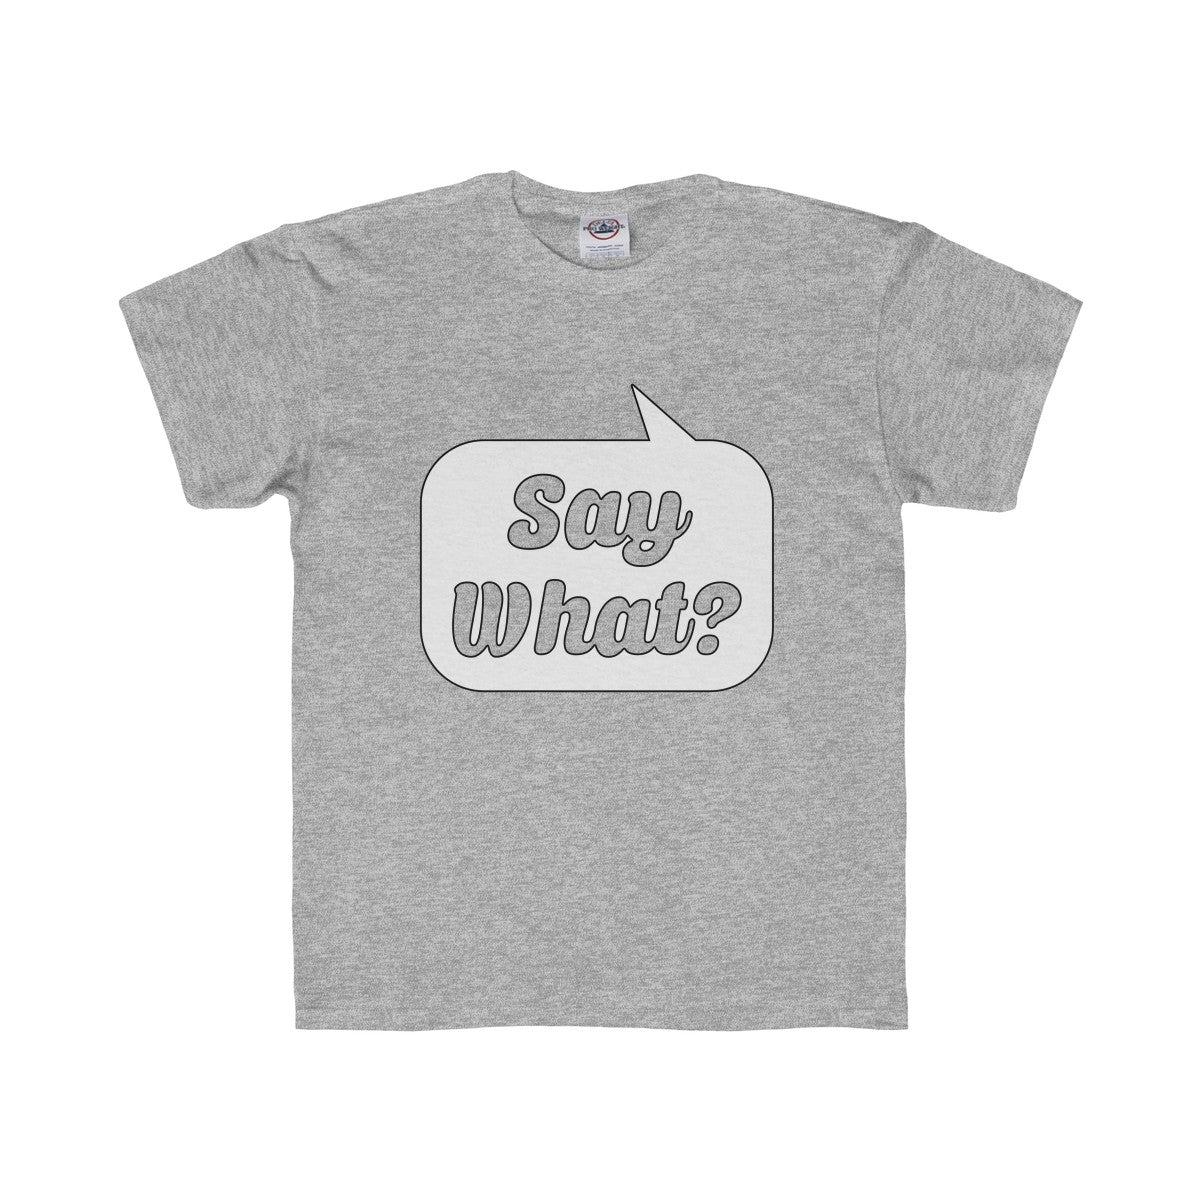 Say What? Youth Regular Fit Tee-Kids clothes-PureDesignTees